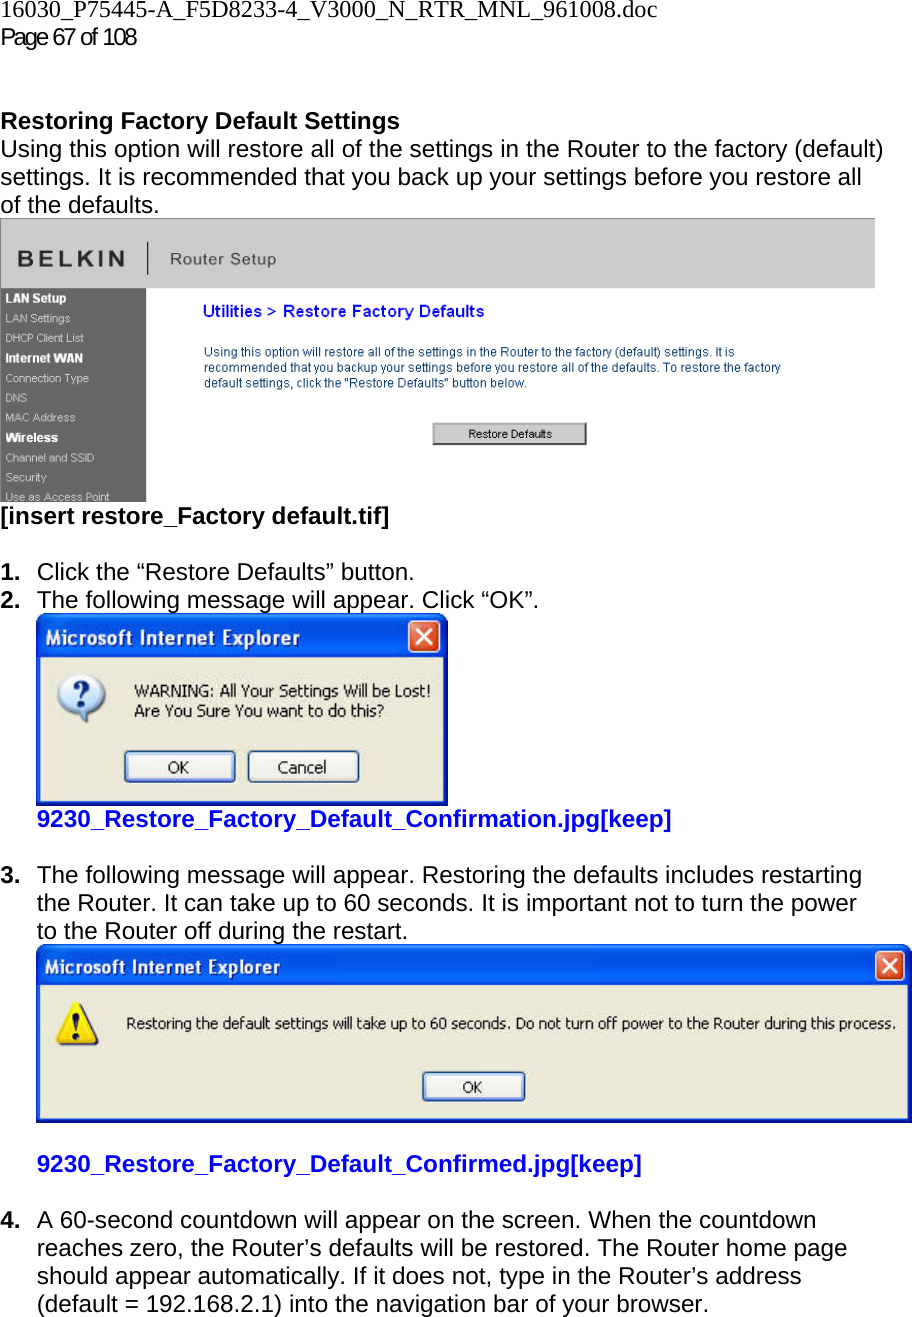 16030_P75445-A_F5D8233-4_V3000_N_RTR_MNL_961008.doc  Page 67 of 108    Restoring Factory Default Settings Using this option will restore all of the settings in the Router to the factory (default) settings. It is recommended that you back up your settings before you restore all of the defaults.  [insert restore_Factory default.tif]  1.  Click the “Restore Defaults” button. 2.  The following message will appear. Click “OK”.  9230_Restore_Factory_Default_Confirmation.jpg[keep]  3.  The following message will appear. Restoring the defaults includes restarting the Router. It can take up to 60 seconds. It is important not to turn the power to the Router off during the restart.  9230_Restore_Factory_Default_Confirmed.jpg[keep]  4.  A 60-second countdown will appear on the screen. When the countdown reaches zero, the Router’s defaults will be restored. The Router home page should appear automatically. If it does not, type in the Router’s address (default = 192.168.2.1) into the navigation bar of your browser.    